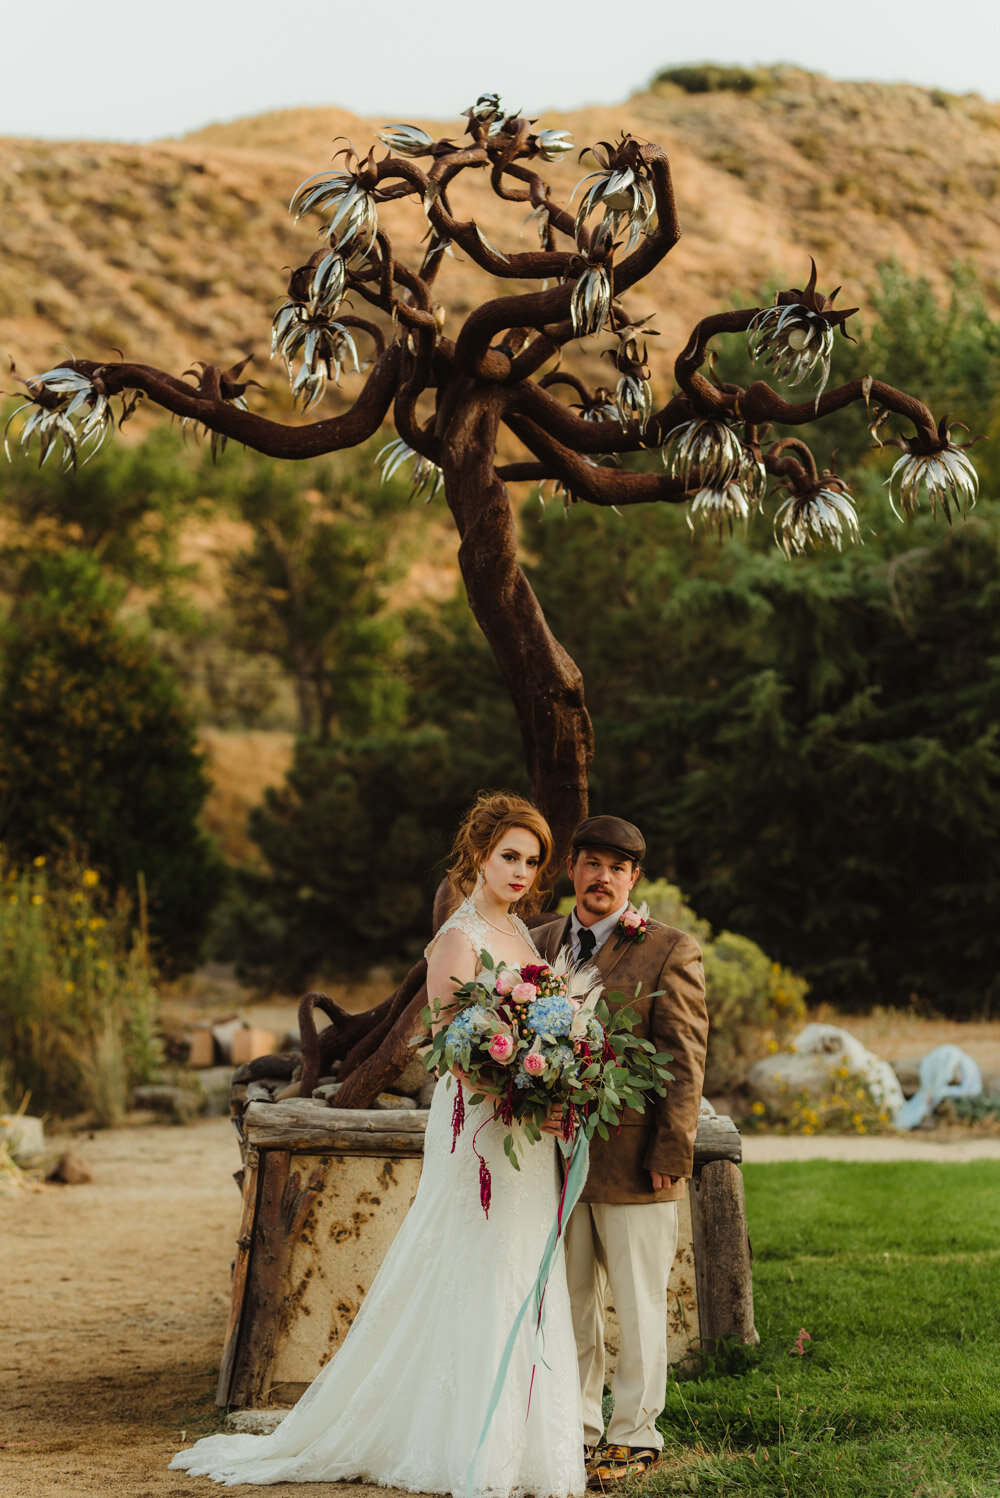 River School Farm Wedding, photo of couple in front of a burning man like sculpture 